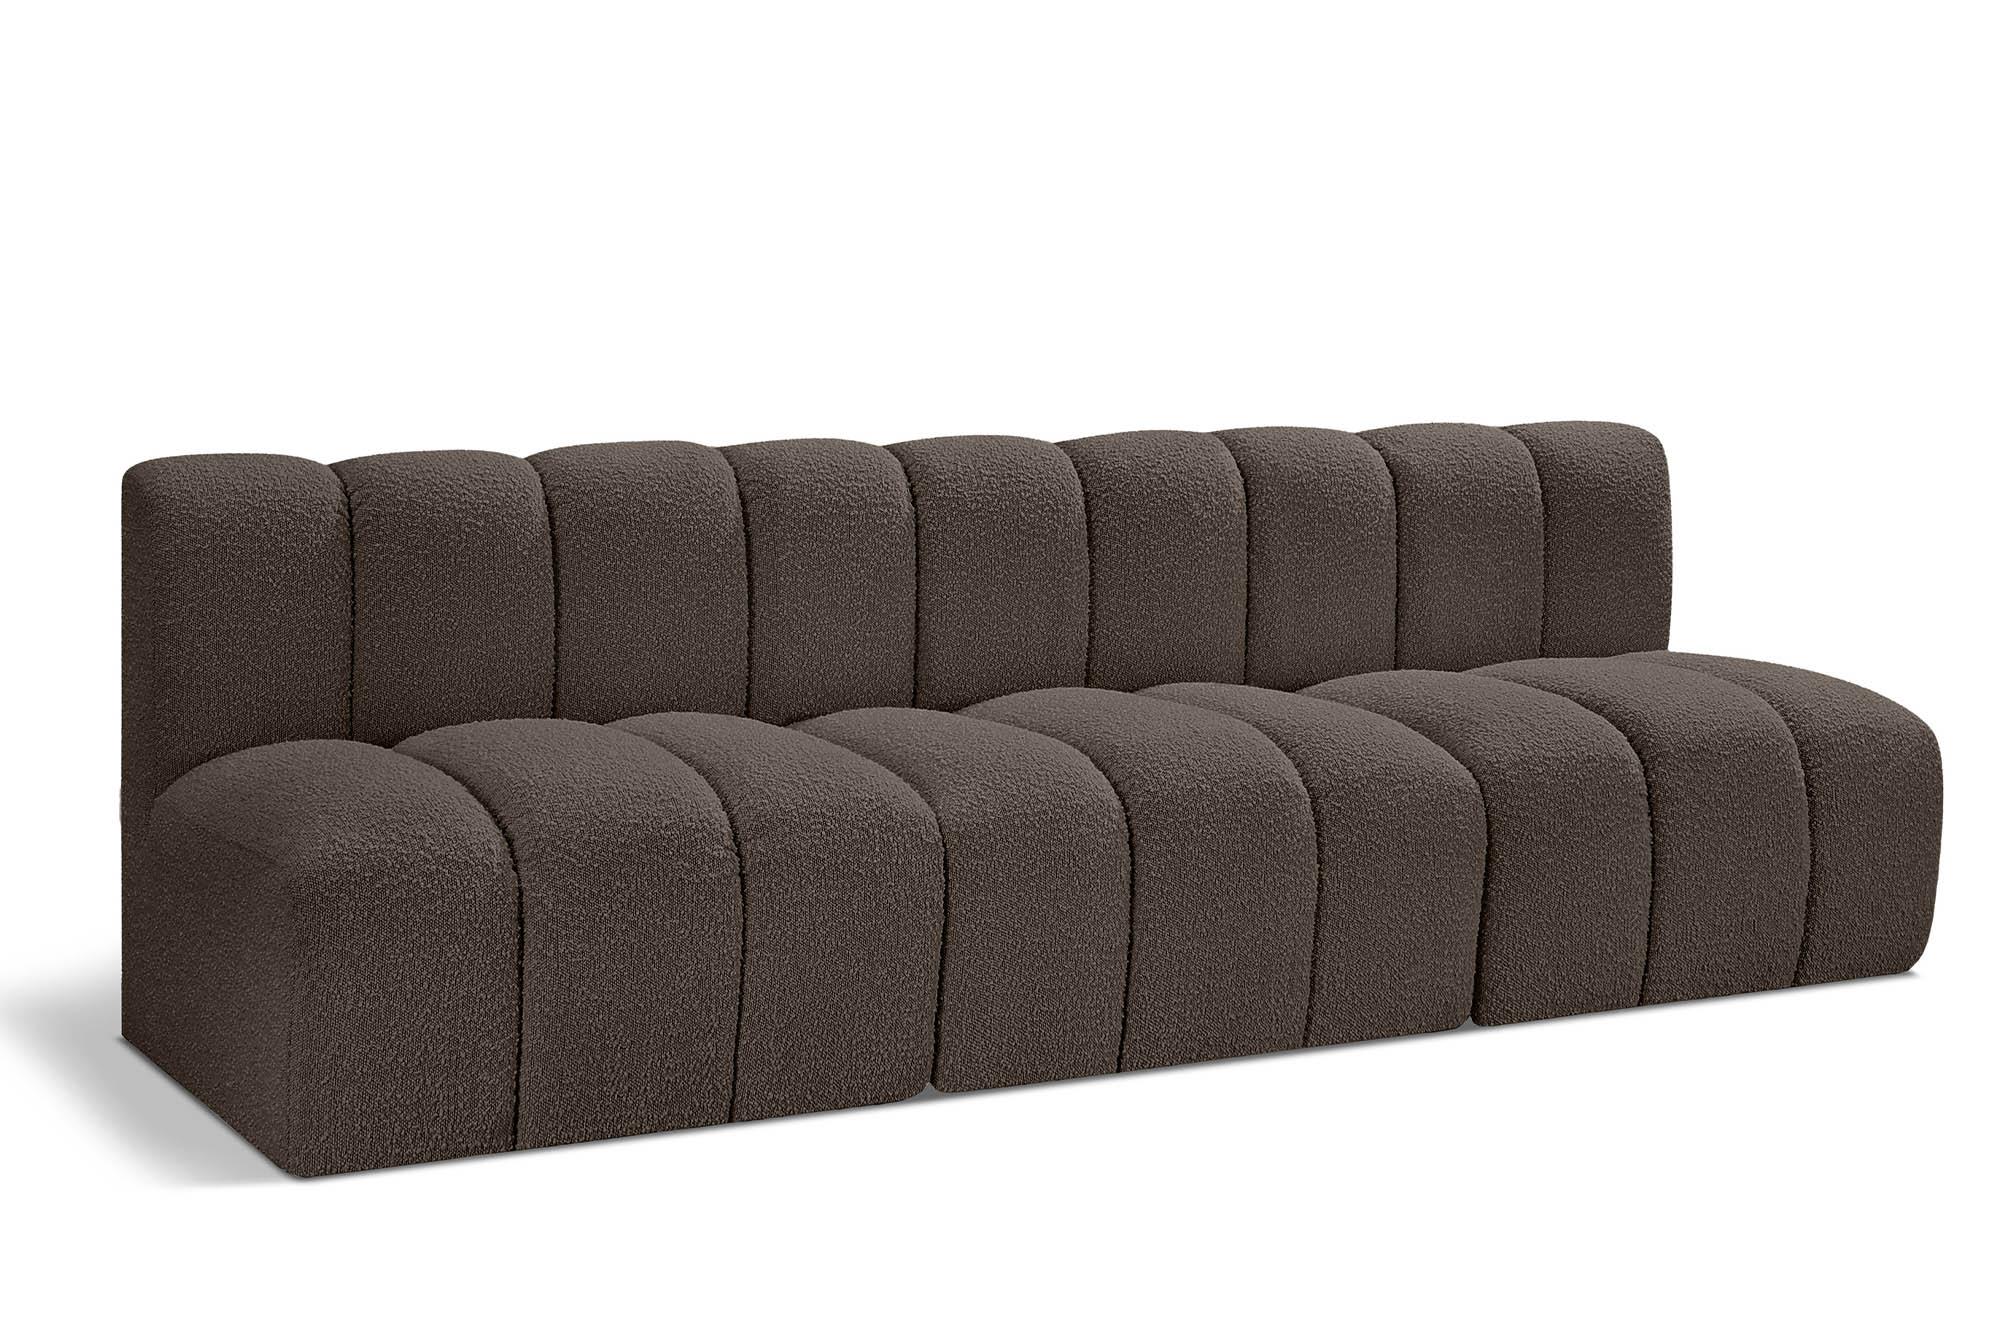 Contemporary, Modern Modular Sofa ARC 102Brown-S3F 102Brown-S3F in Brown 